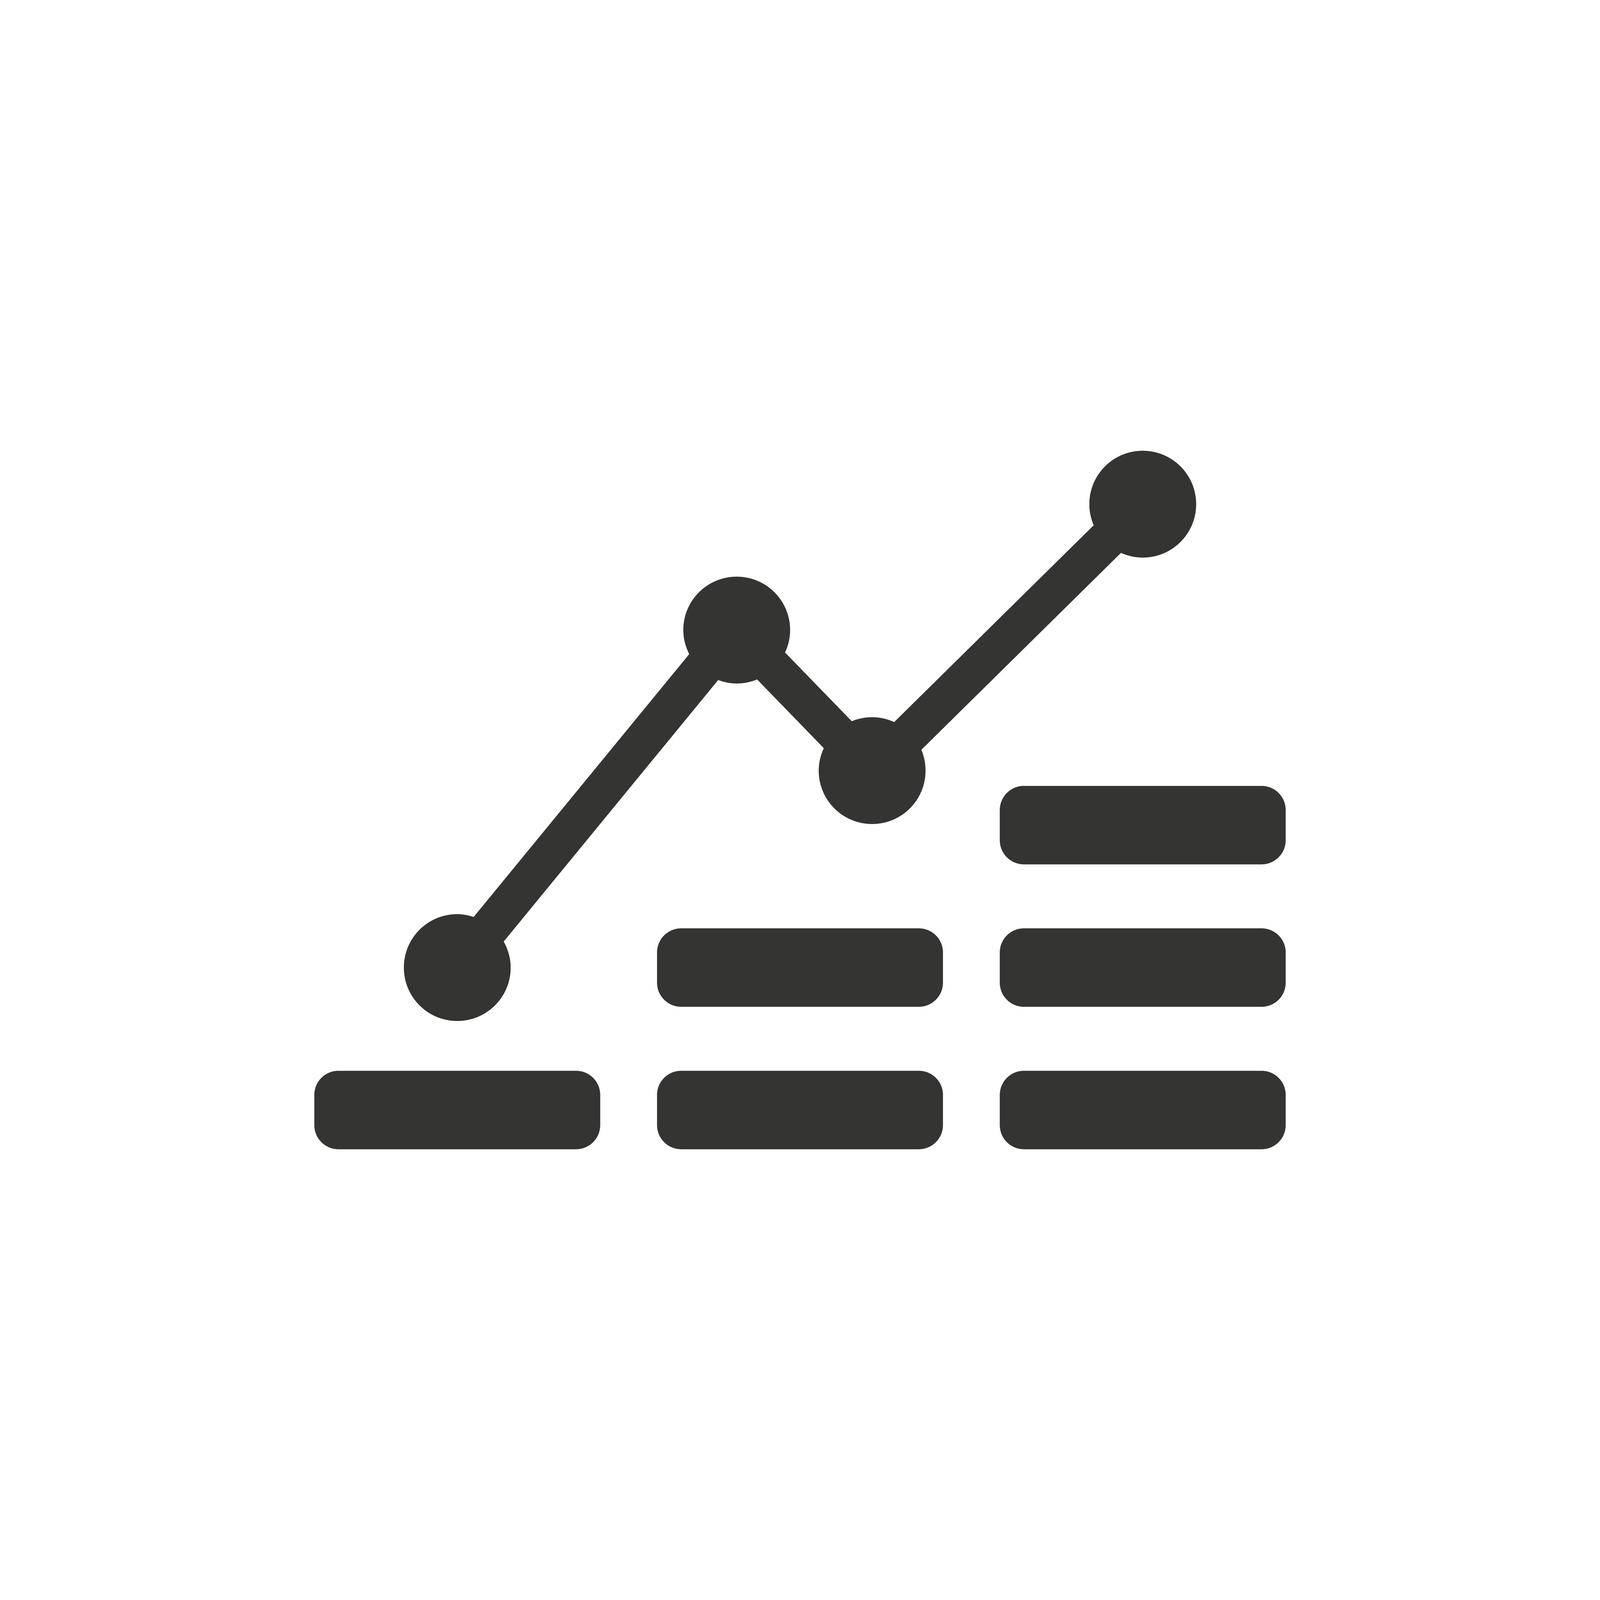 Financial Analysis icon. Vector EPS file.